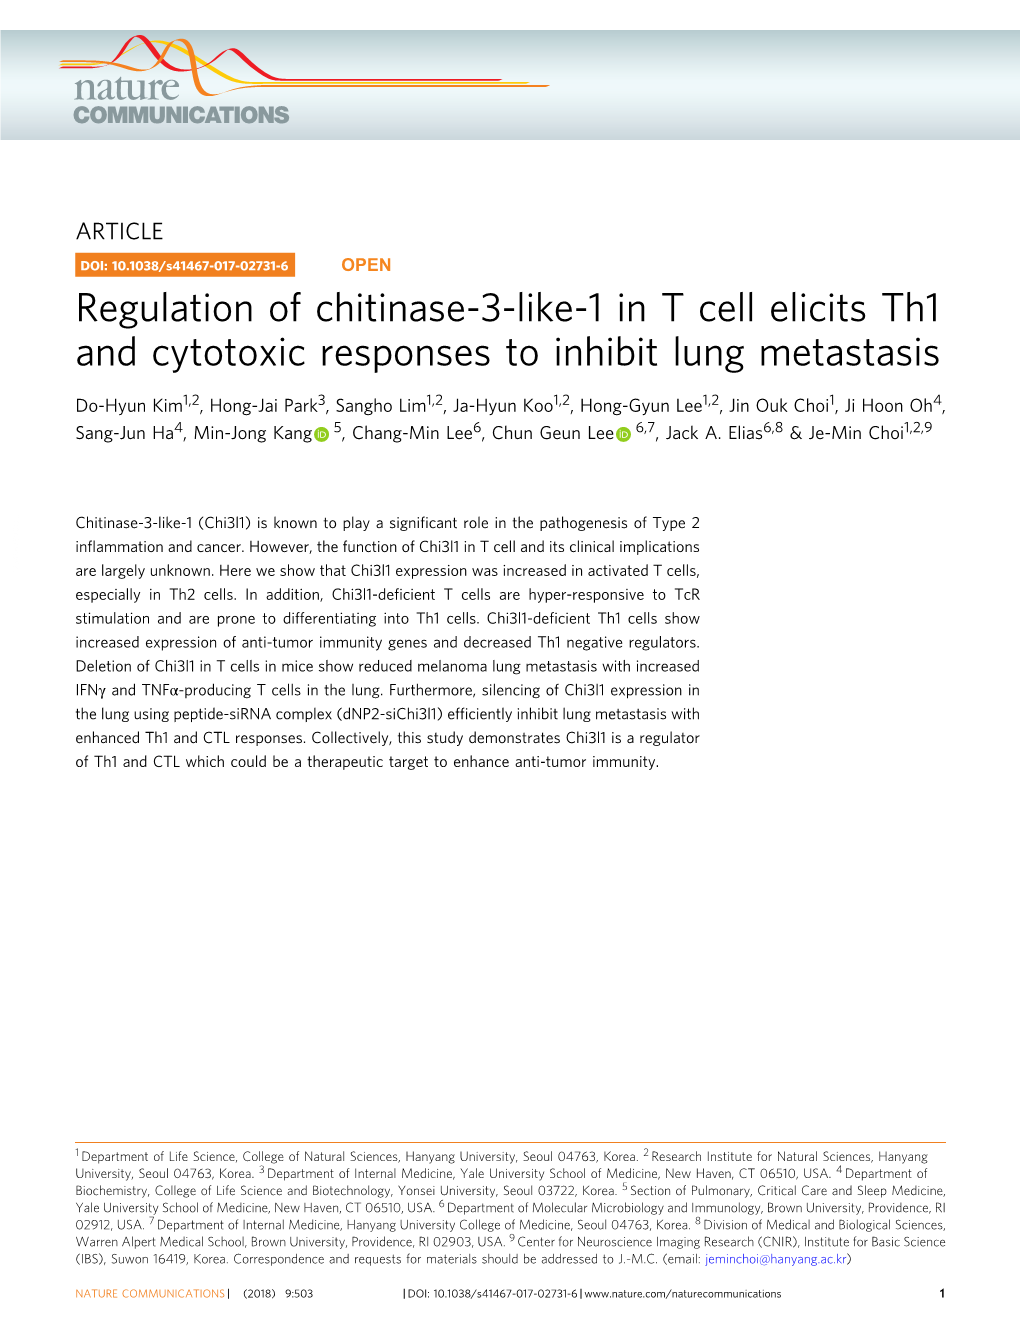 Regulation of Chitinase-3-Like-1 in T Cell Elicits Th1 and Cytotoxic Responses to Inhibit Lung Metastasis